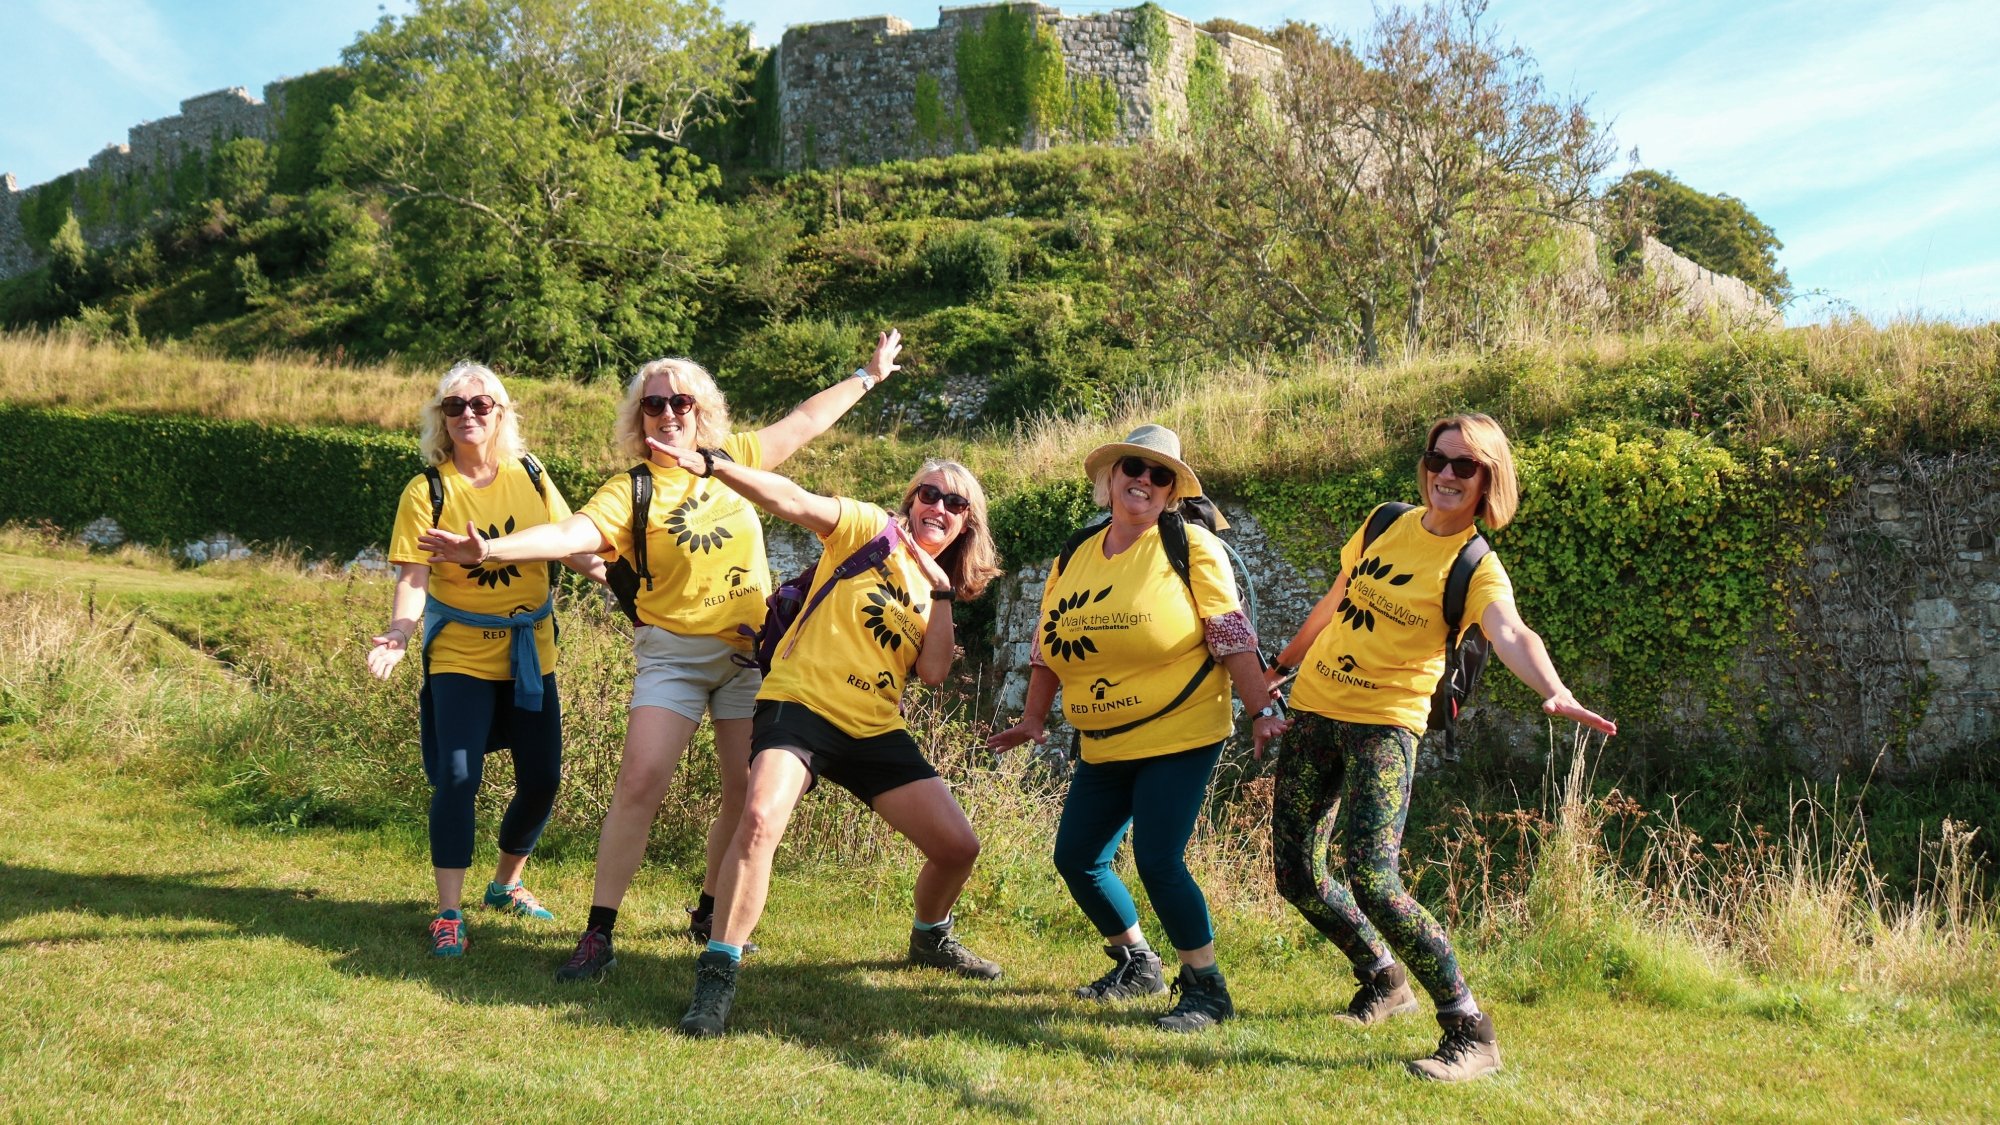 A group of walkers smiling and posing for a team photo with Carisbrooke castle in the background